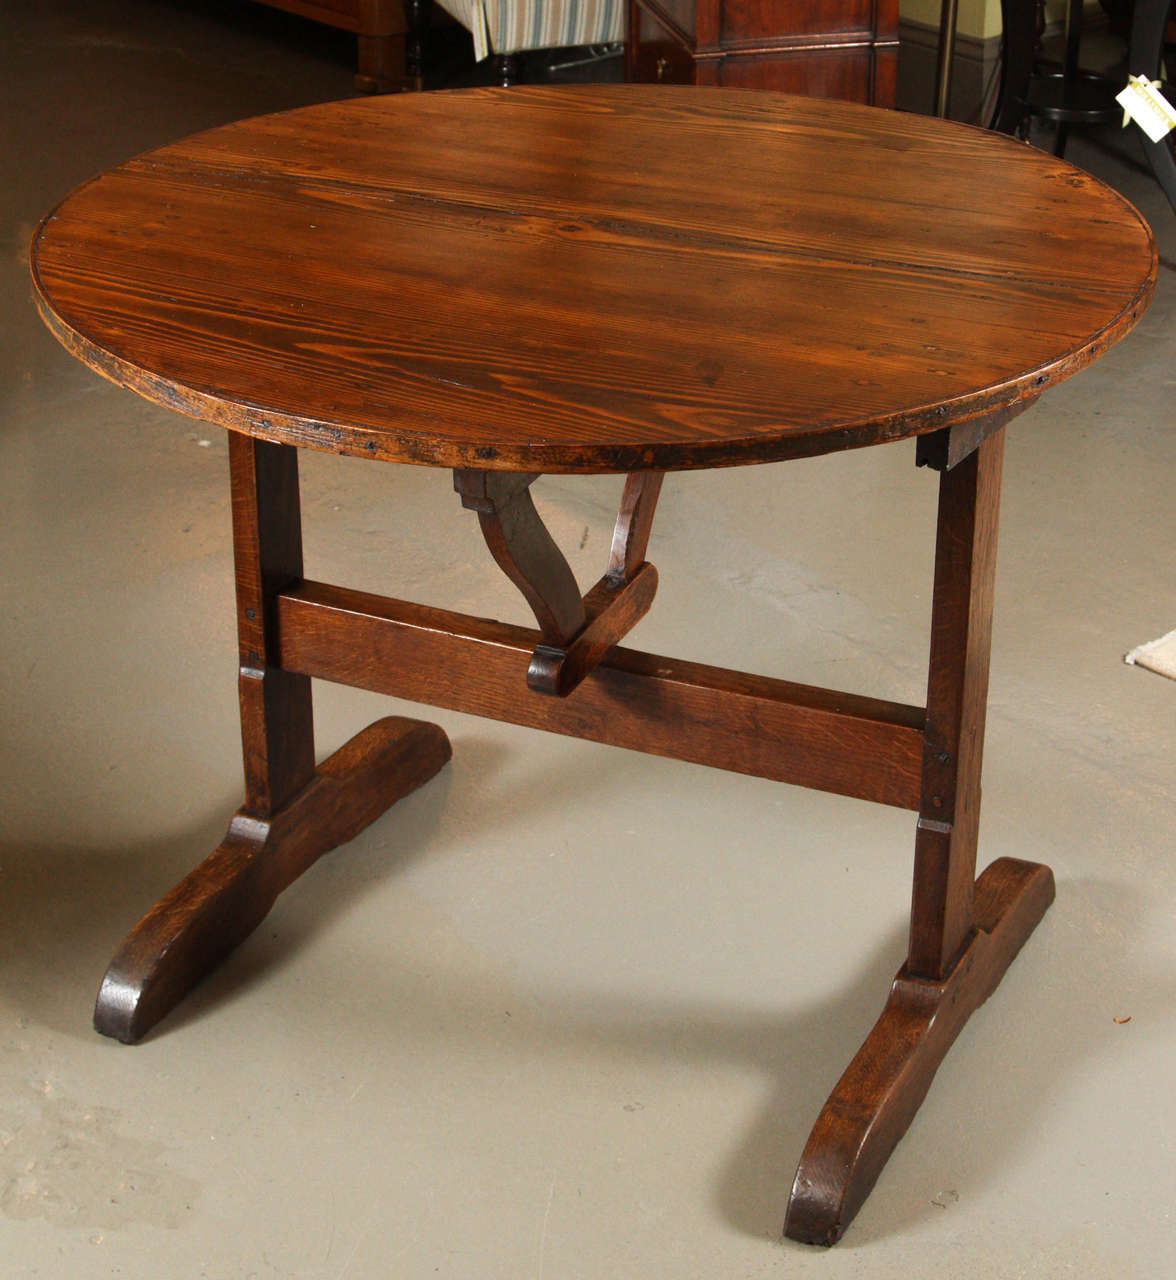 A French Vendange Table, mid-19th century with a tilt top and warm patina.